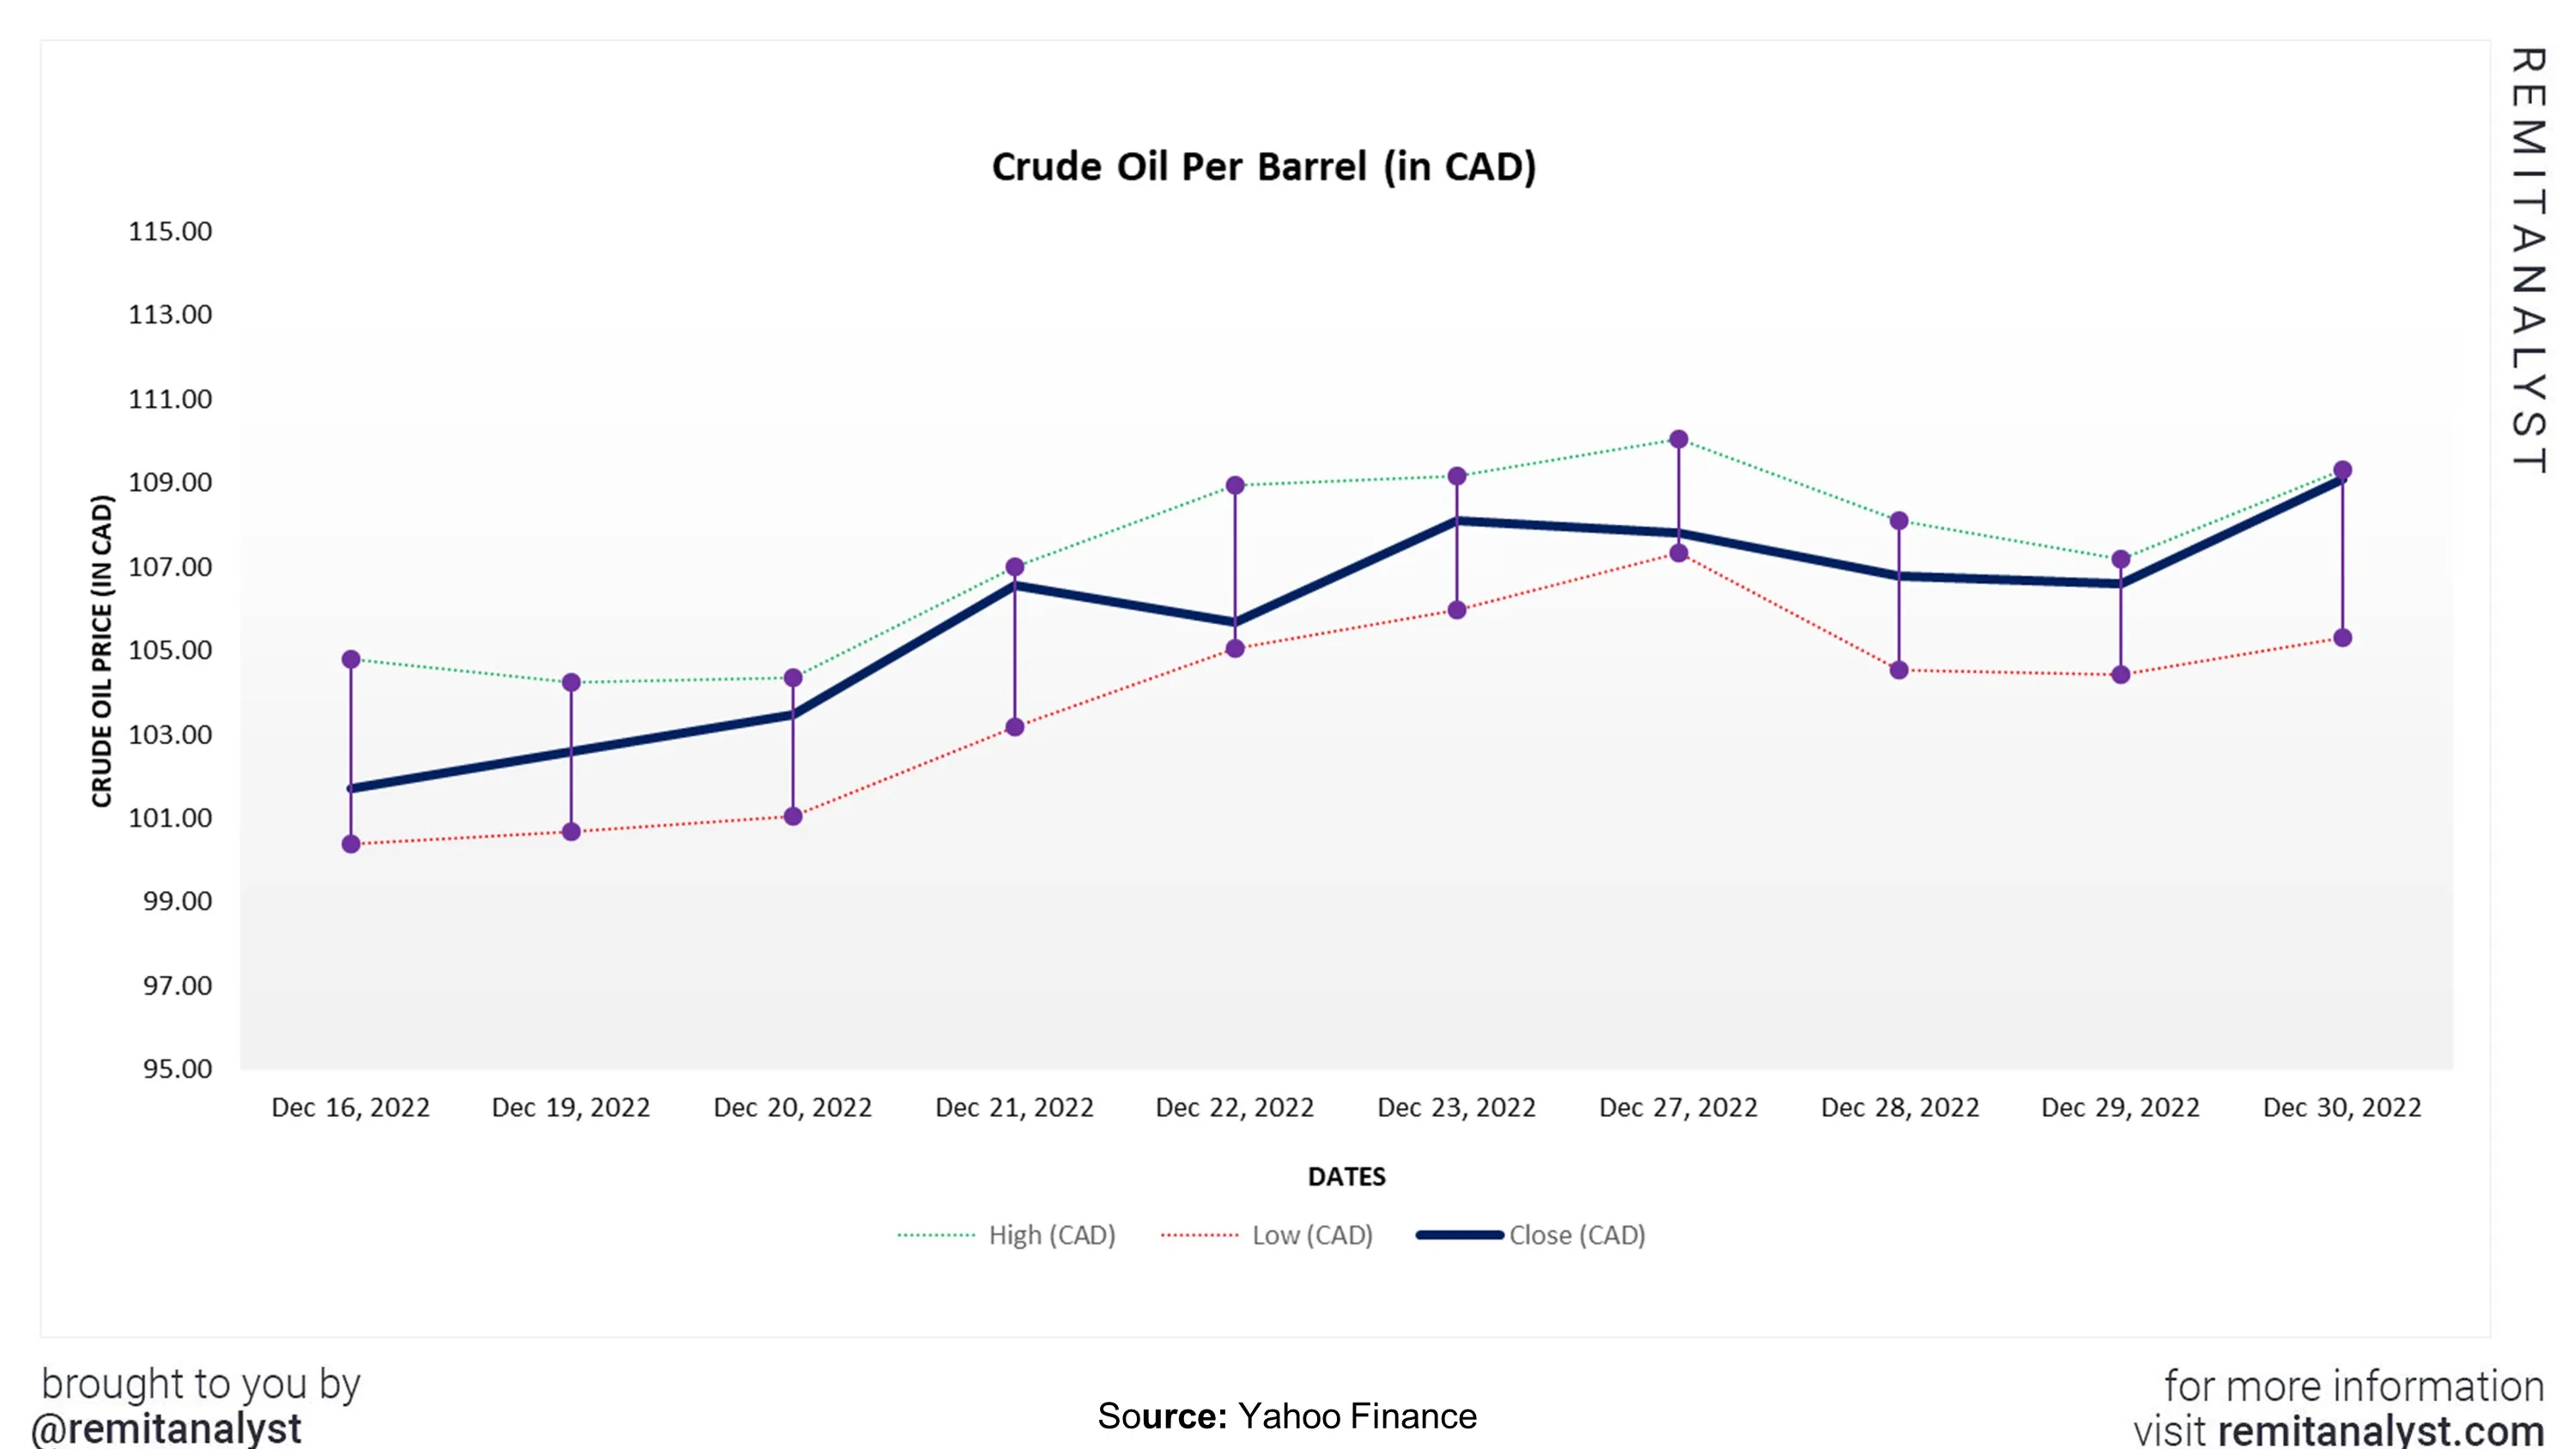 crude-oil-prices-canada-from-16-dec-2022-to-31-dec-2022